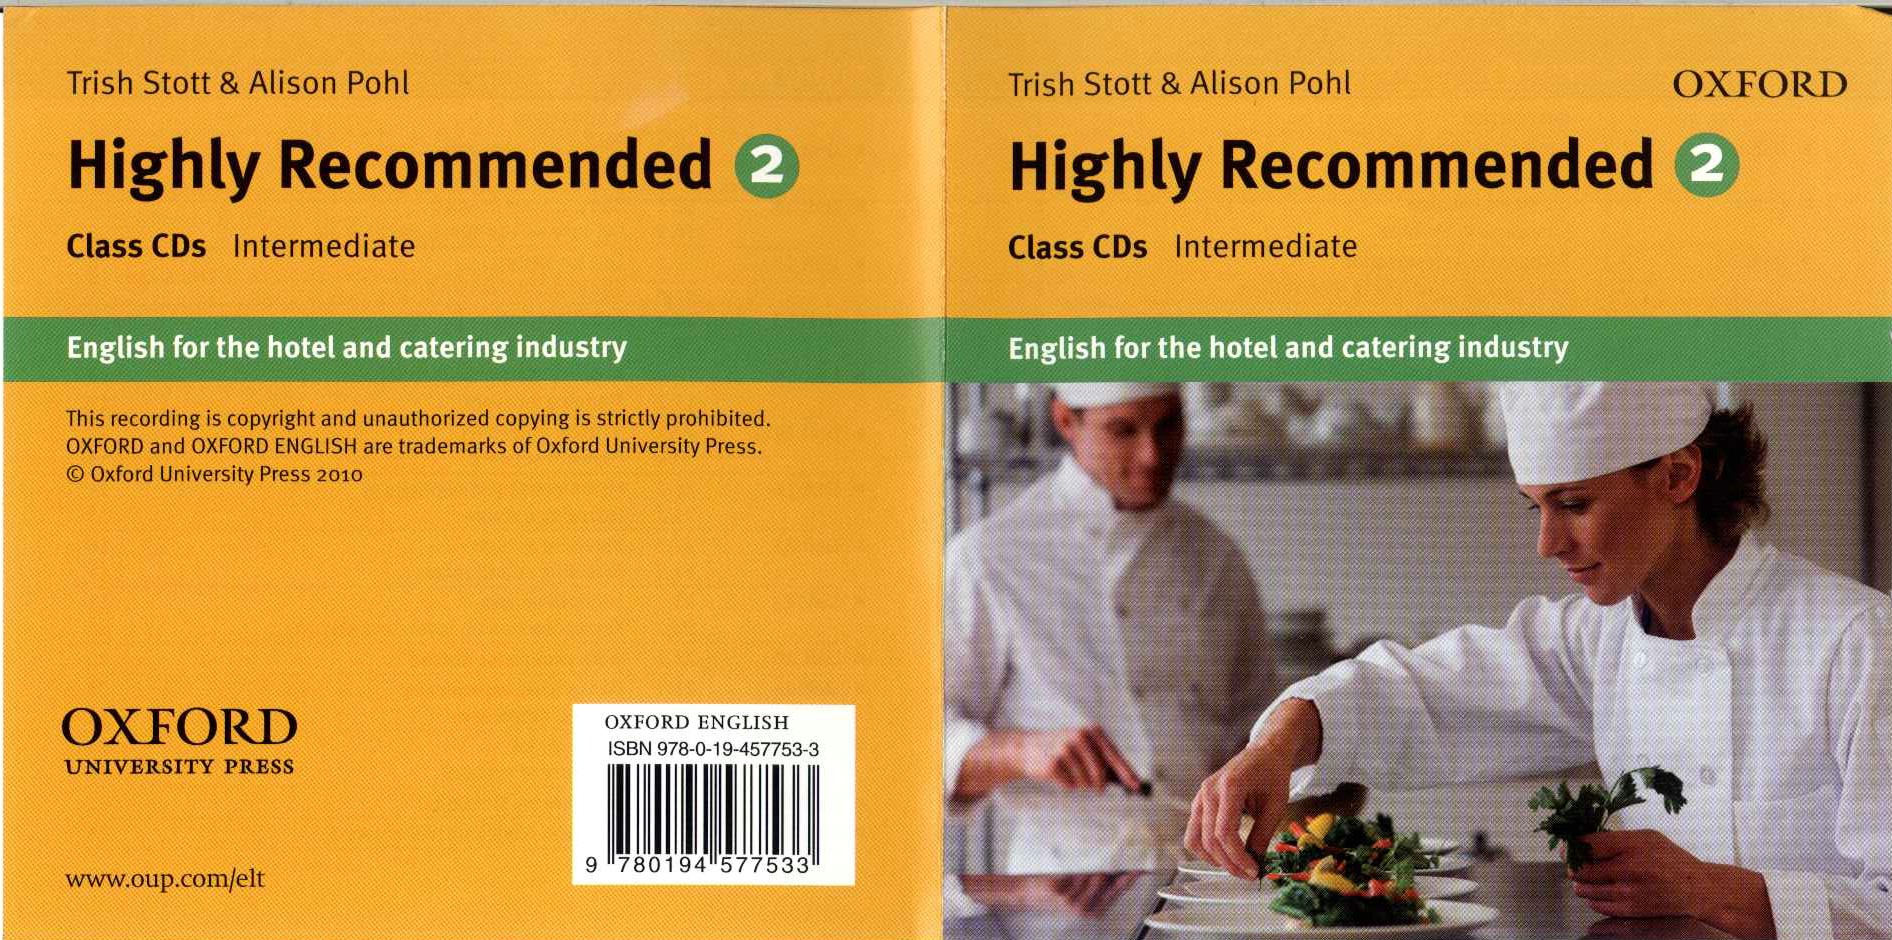 Highly Recommended – English for the hotel and catering industry (Oxford)